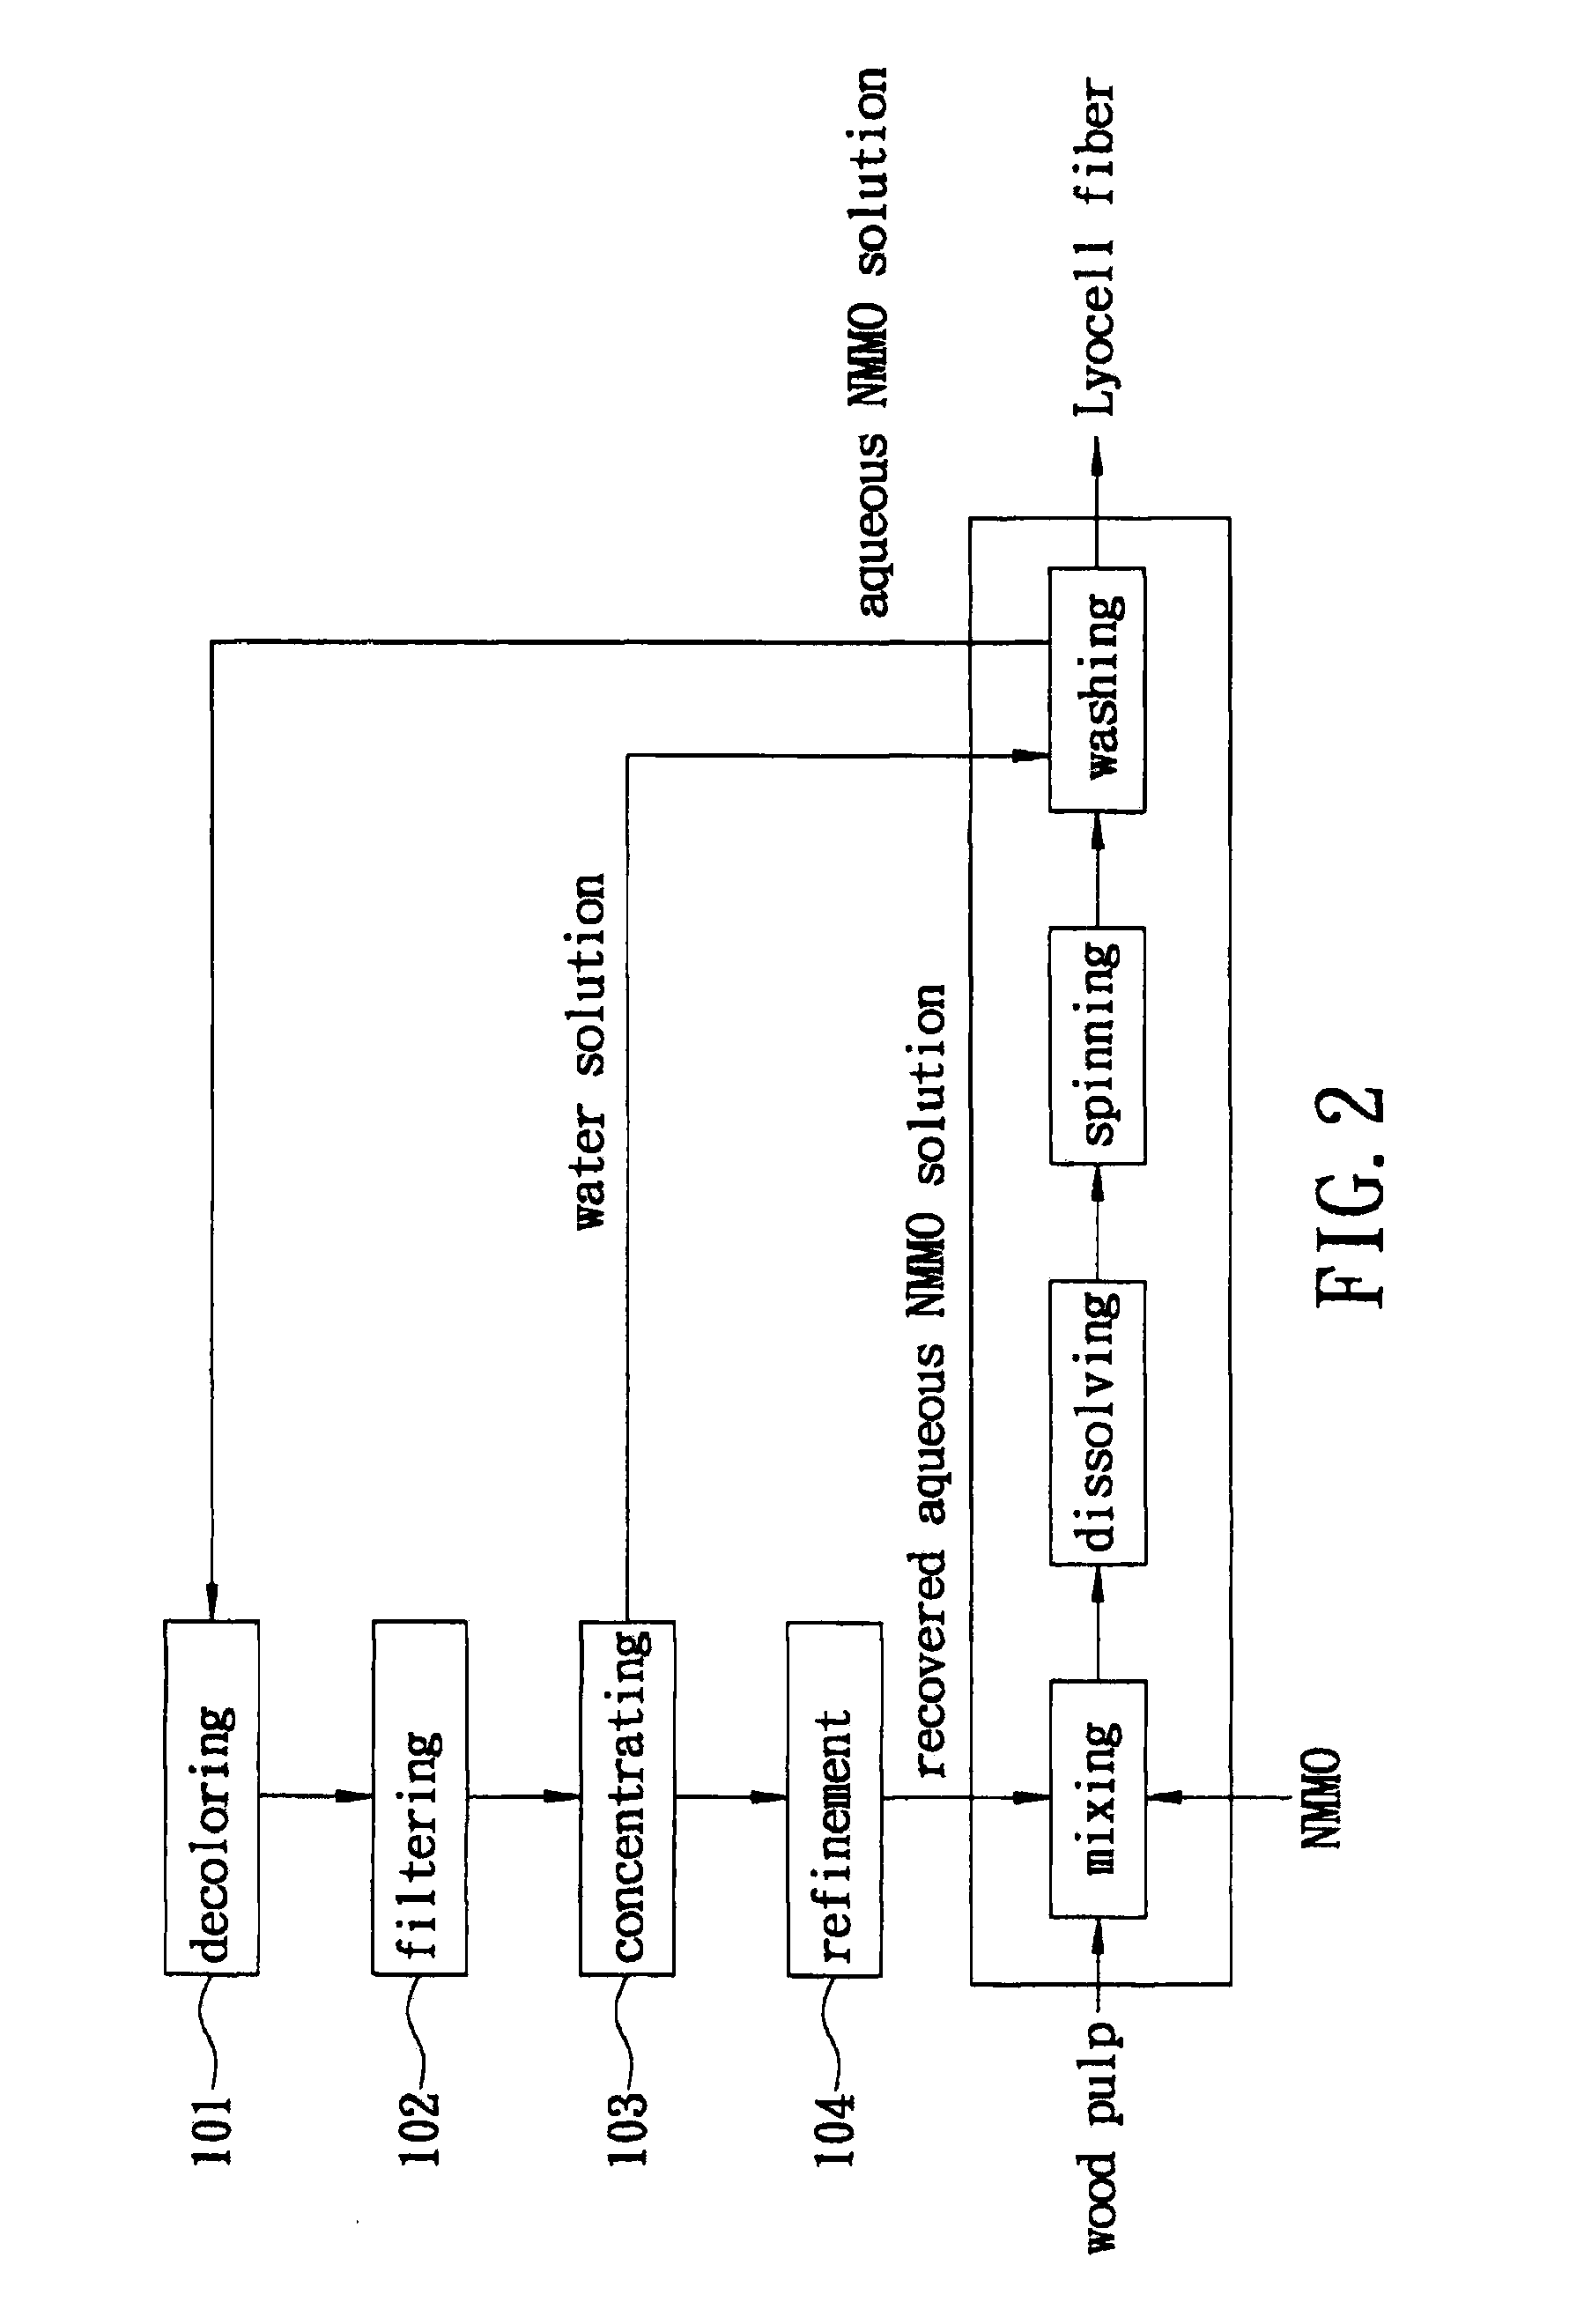 Method of Recovering Aqueous N-methylmorpholine-N-Oxide Solution Used in Production of Lyocell Fiber